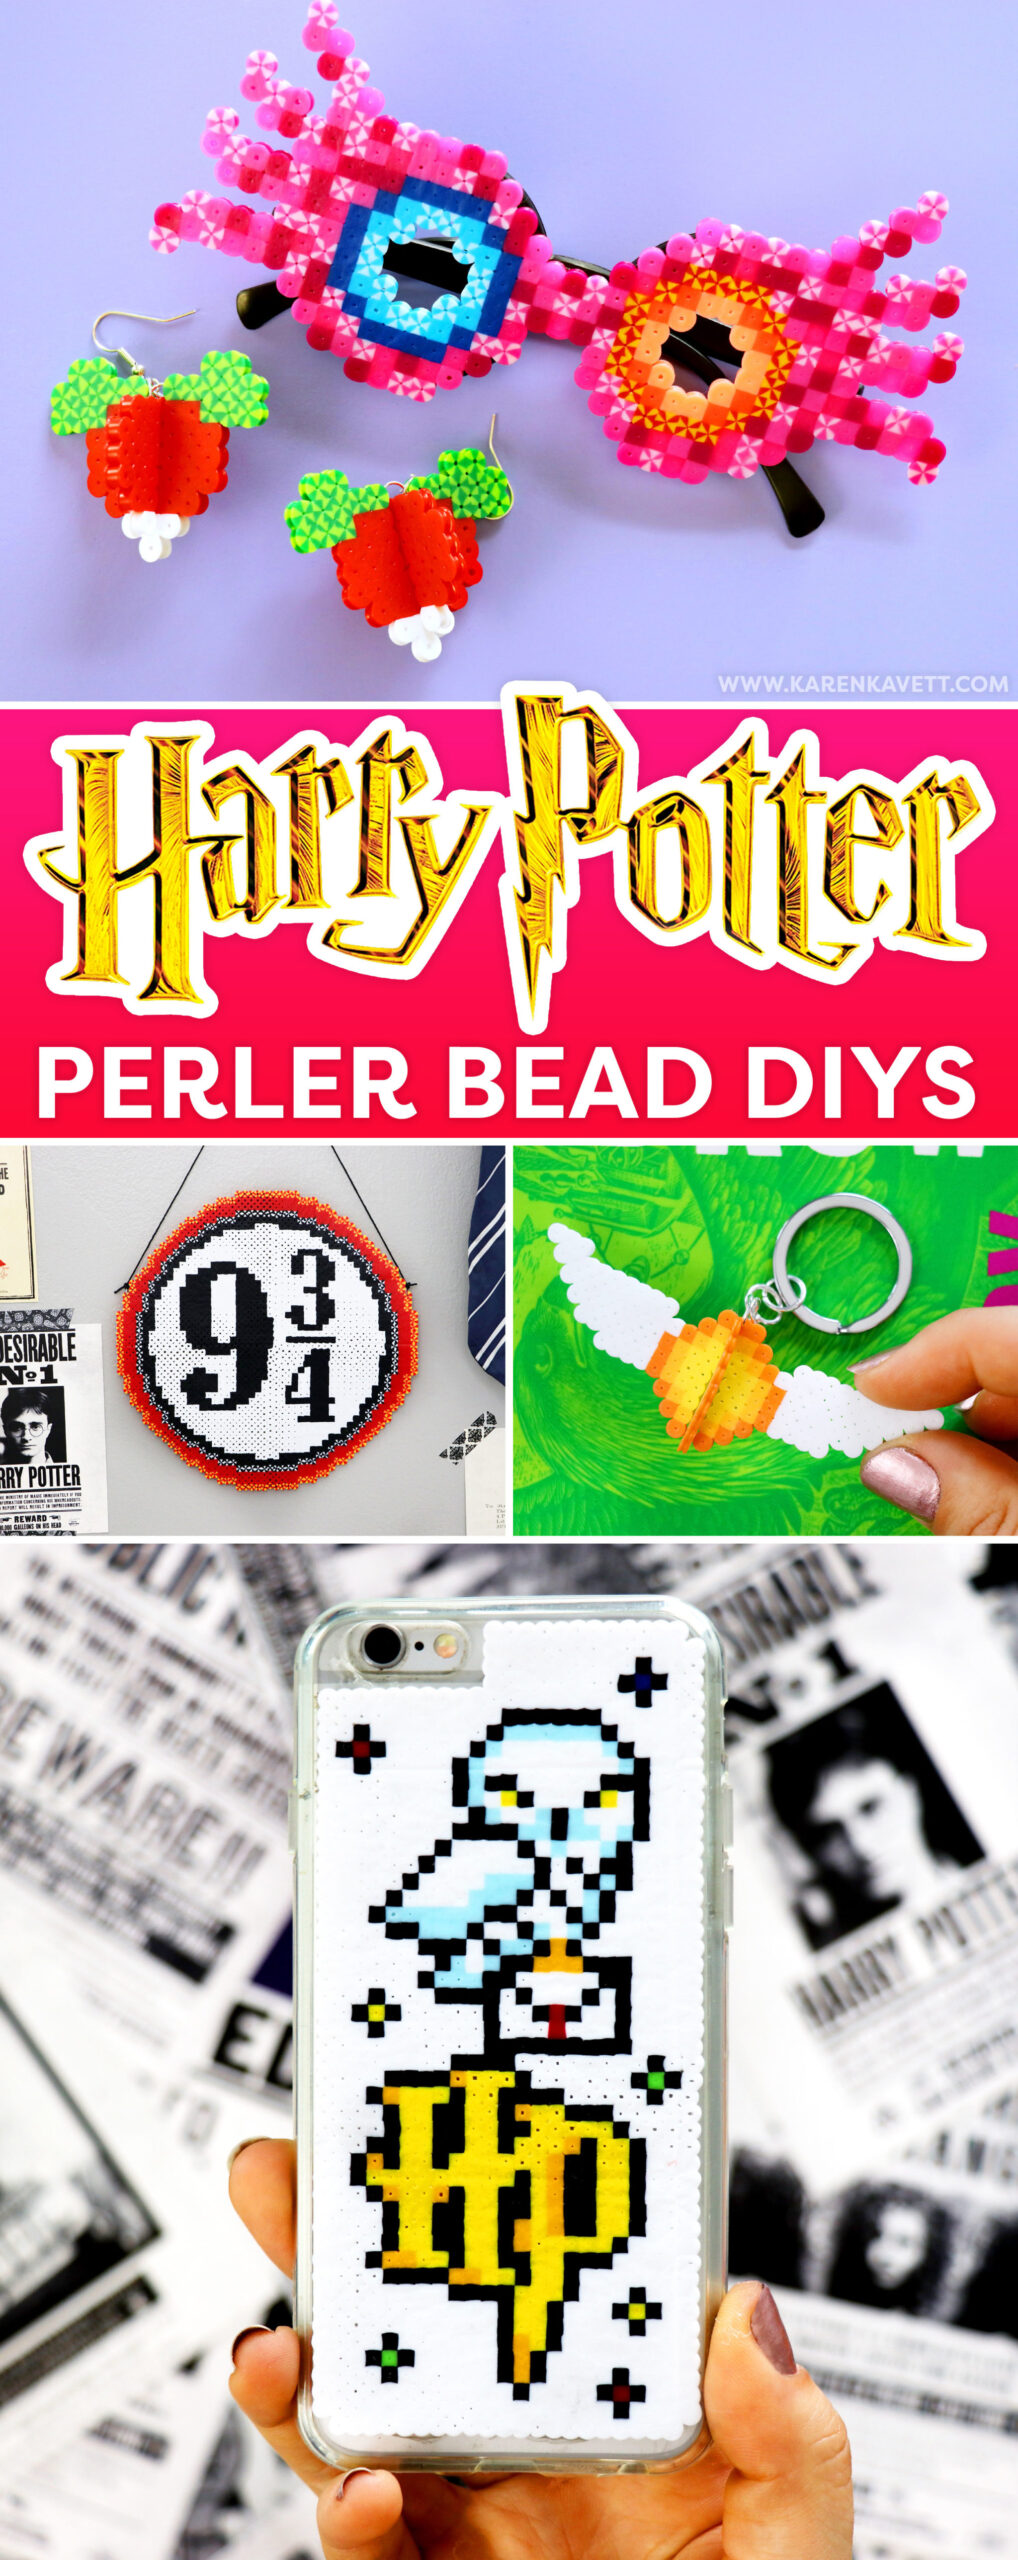 Hedwig Harry Potter Hama beads by isaletheia More  Harry potter perler  beads, Perler bead art, Perler bead patterns